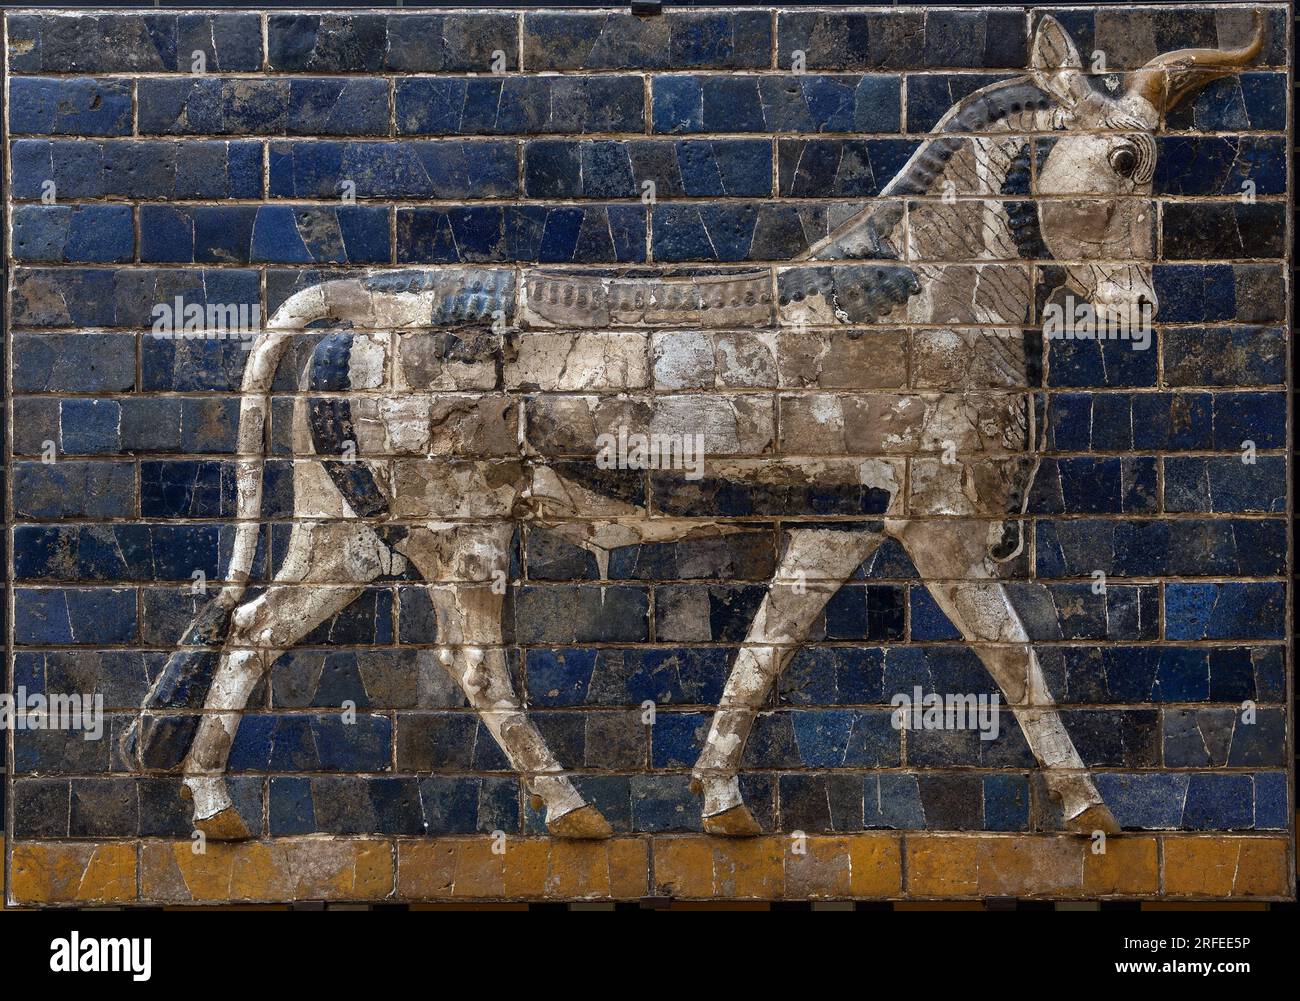 Taureau sacre - reliefs en briques emaillees provenant de la porte d'Ishtar - Babylone - 604-562 av.JC. - periode de Nabuchodonosor Musee Archeologique Istanbul - A bull, detail from glazed brick tiles depicting mythological animals that adorned the Processional Way to the Ishtar Gate in Babylon during the reign of Nebuchadnezzar II (604-562 BC). Babylonian civilization, 7th -6th century BC. Stock Photo